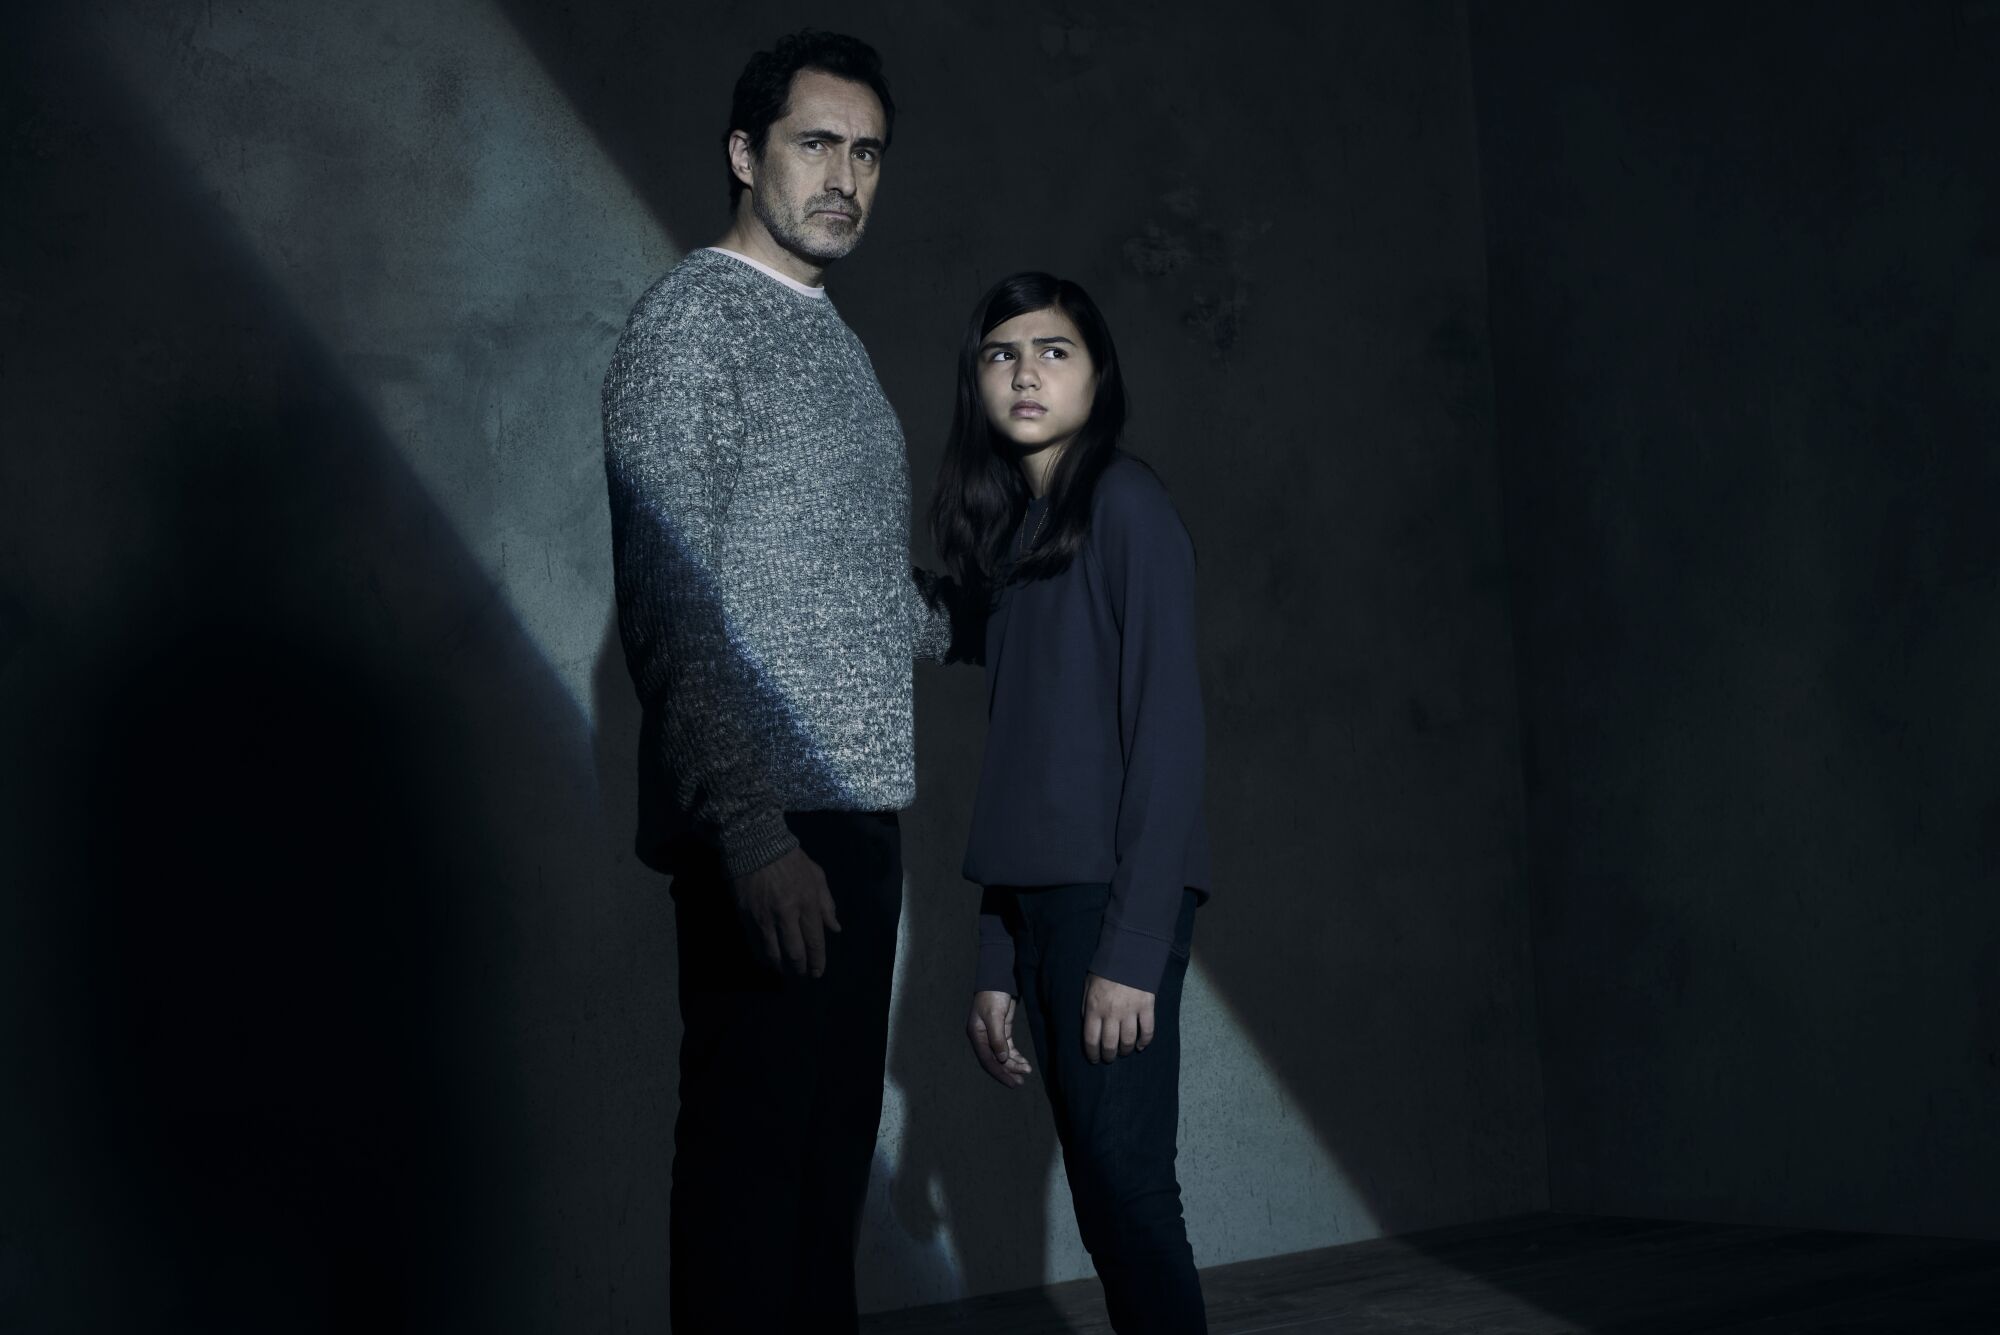 Actors portraying father and daughter stand side by side.